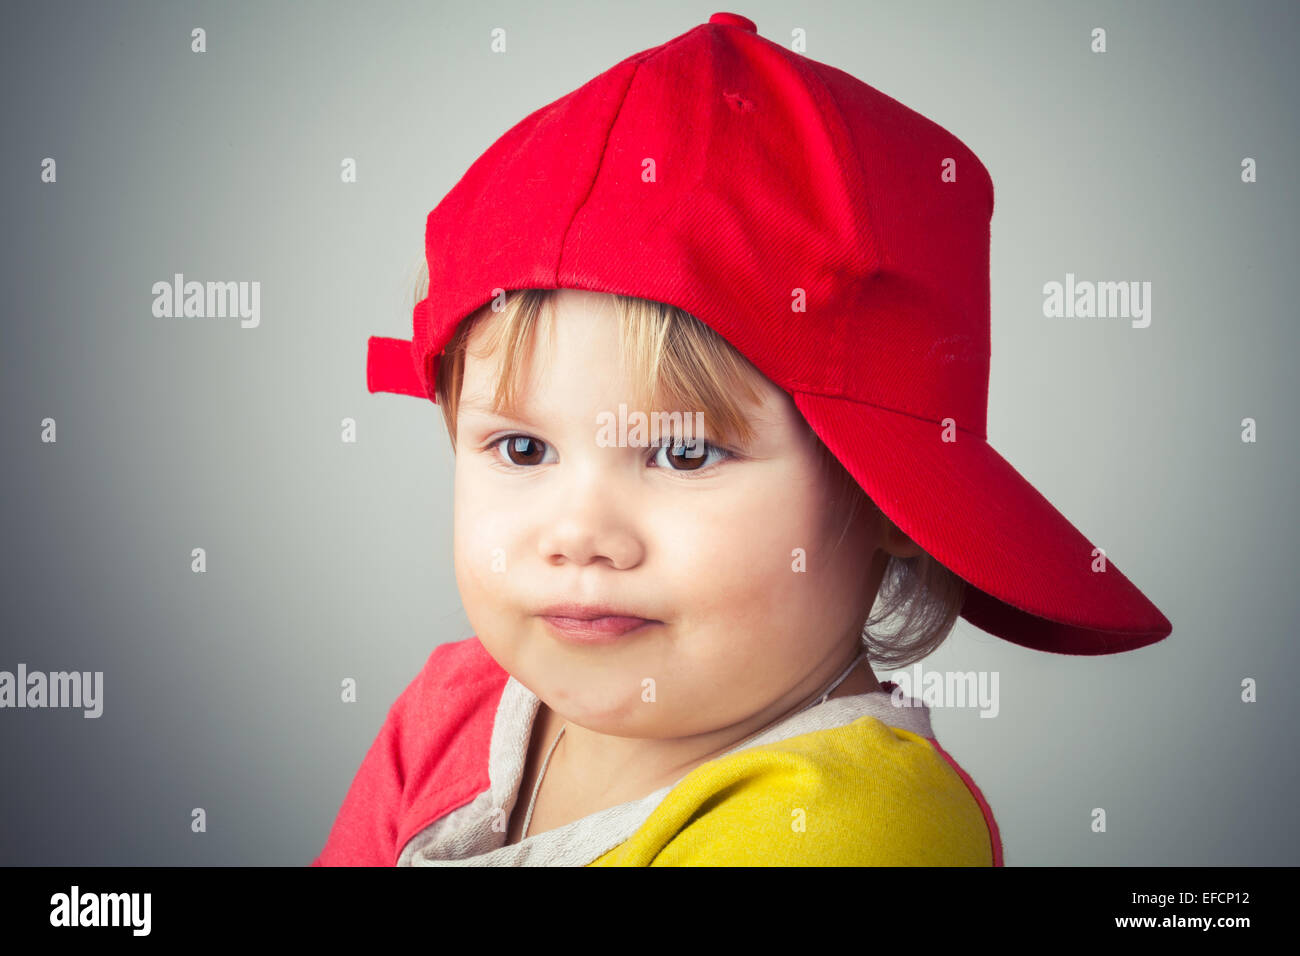 Studio portrait of funny baby girl in red baseball cap over gray wall background. Vintage style, photo filter effect Stock Photo